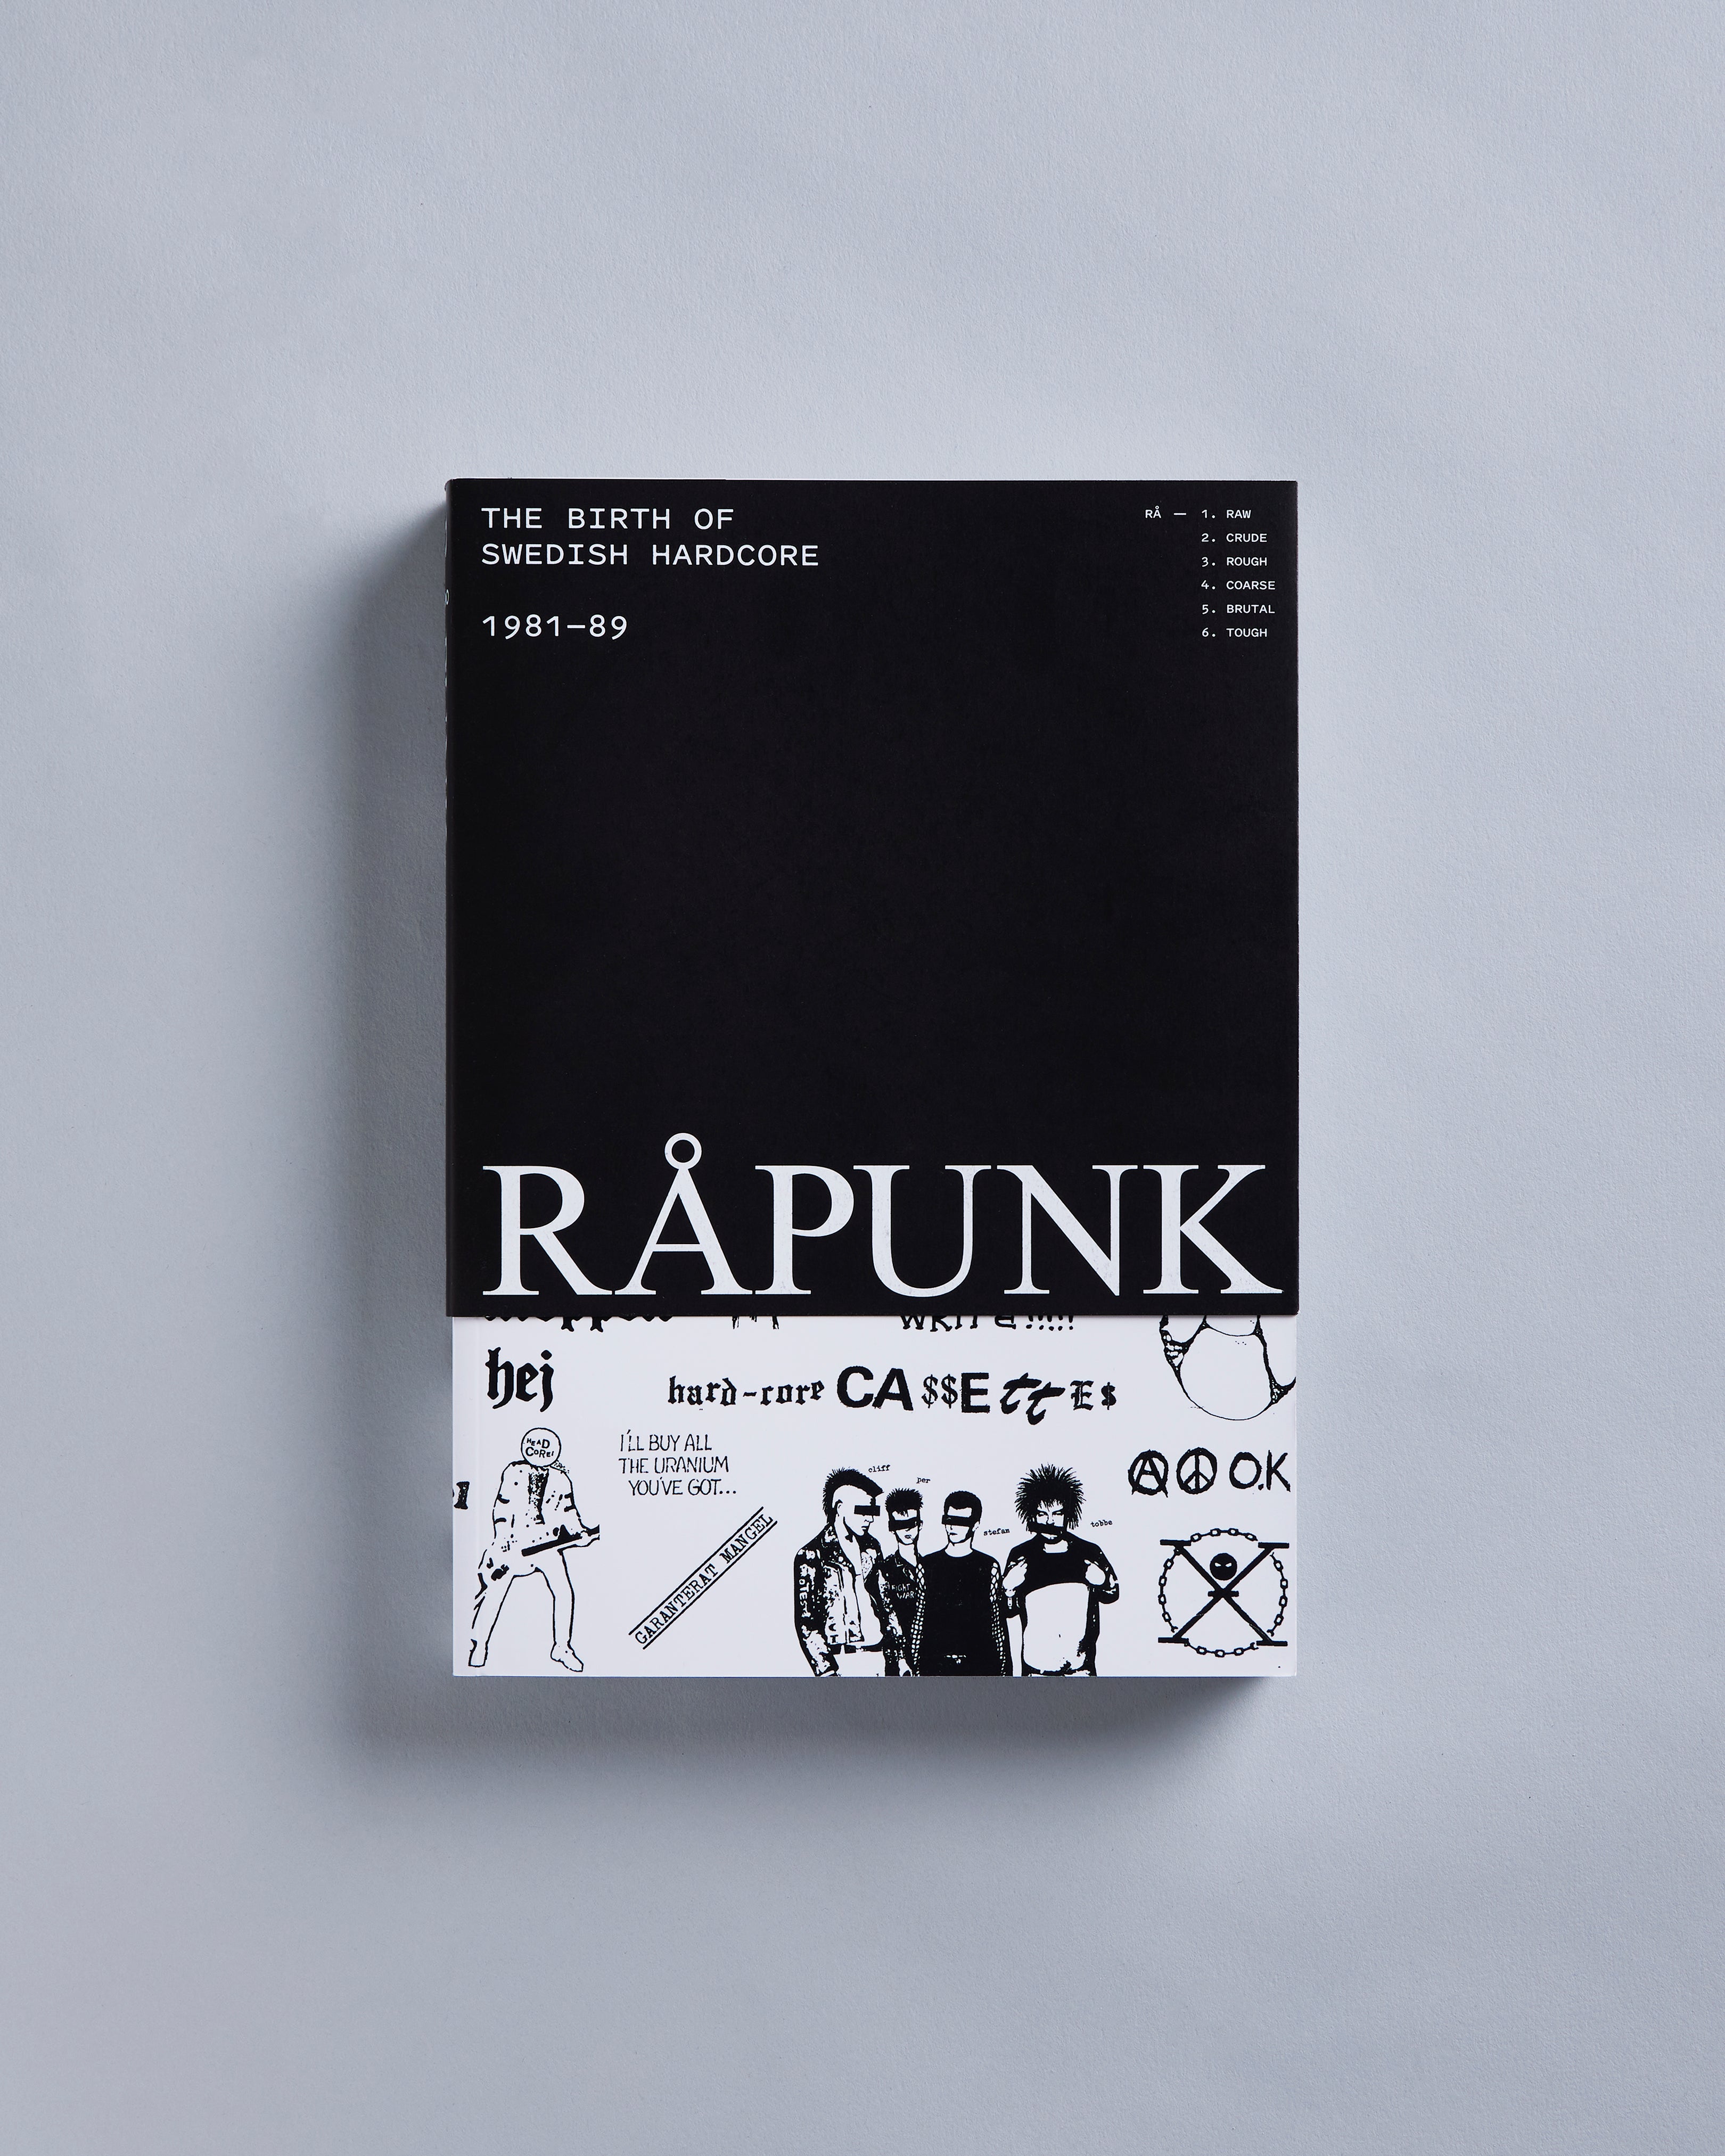 Råpunk: The Birth of Swedish Hardcore 1981-89 book – Sorry State Records